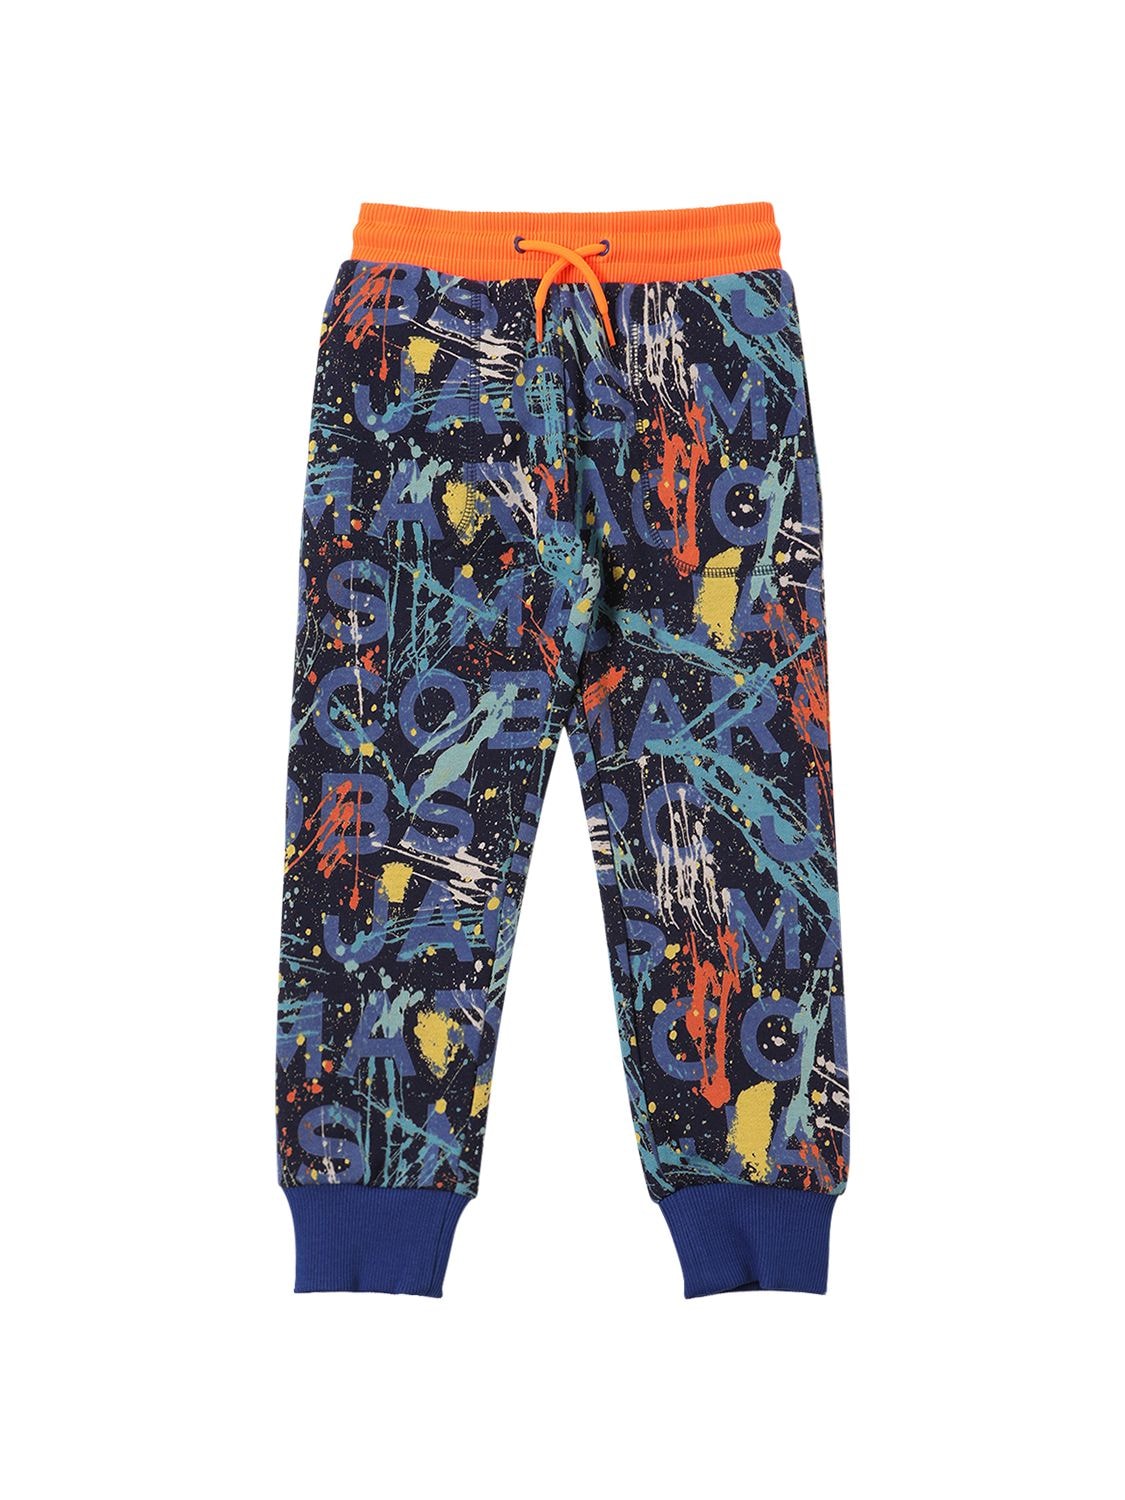 Image of Printed Cotton Blend Sweatpants